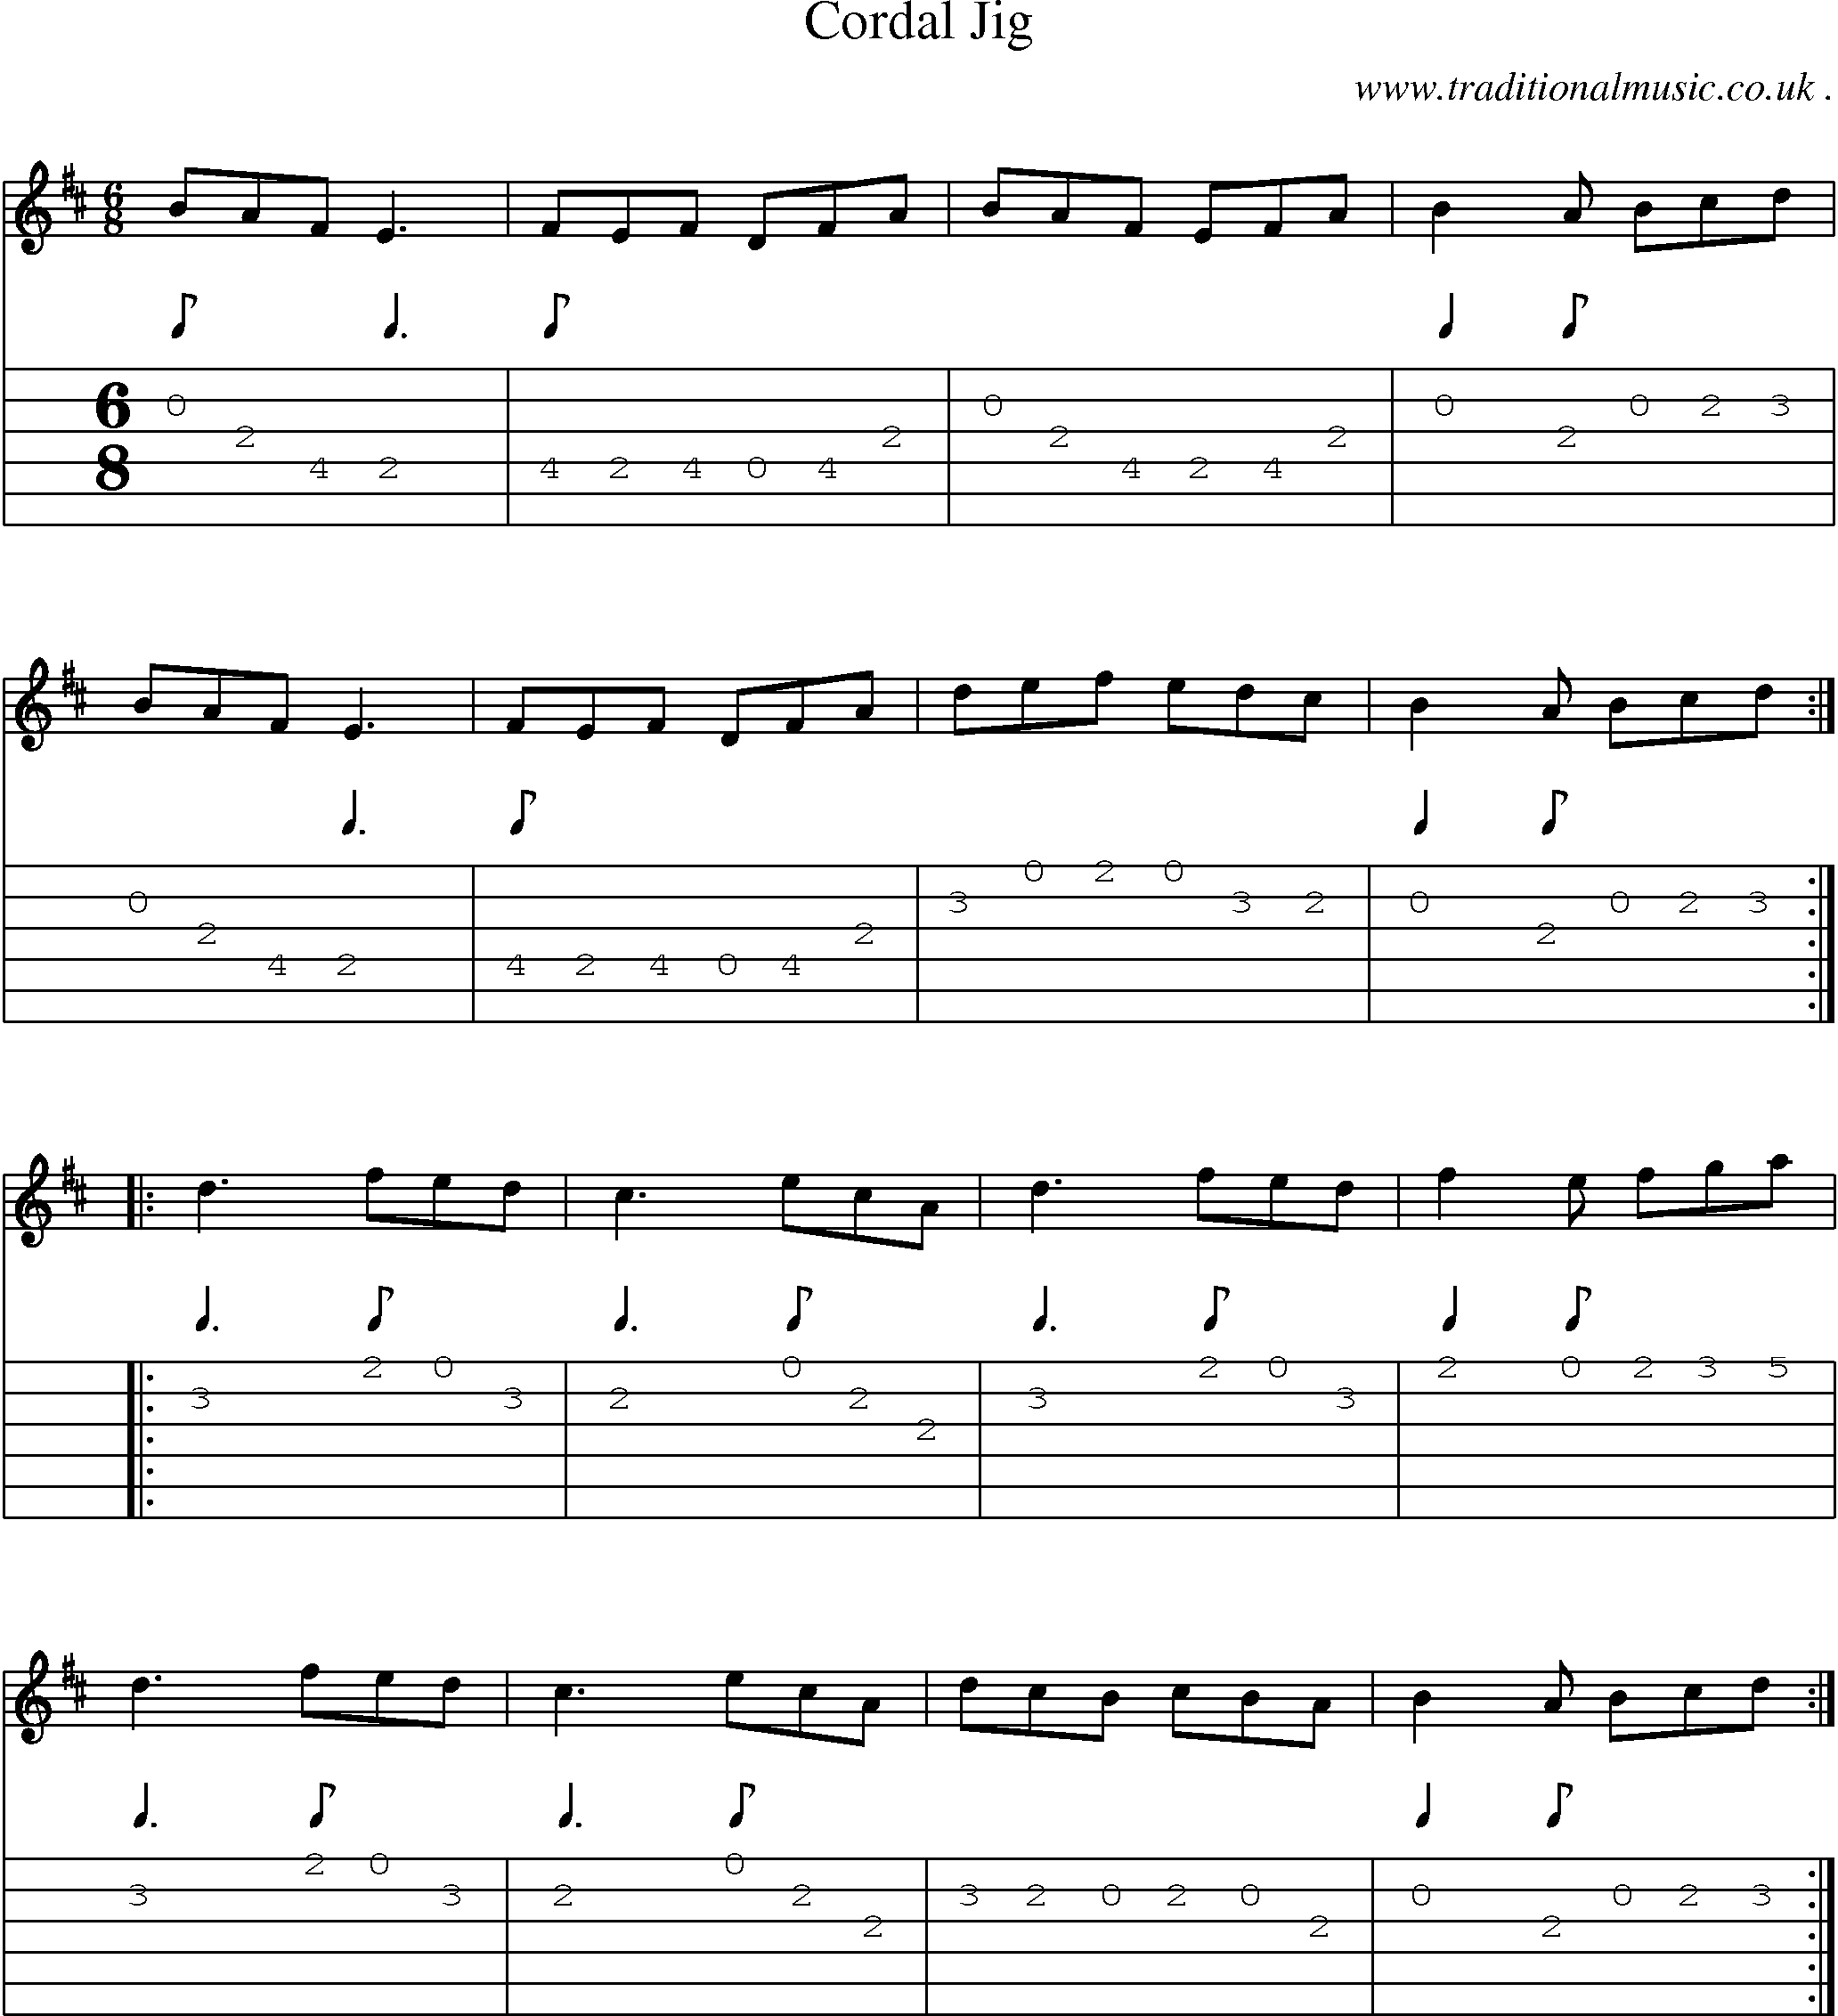 Sheet-Music and Guitar Tabs for Cordal Jig